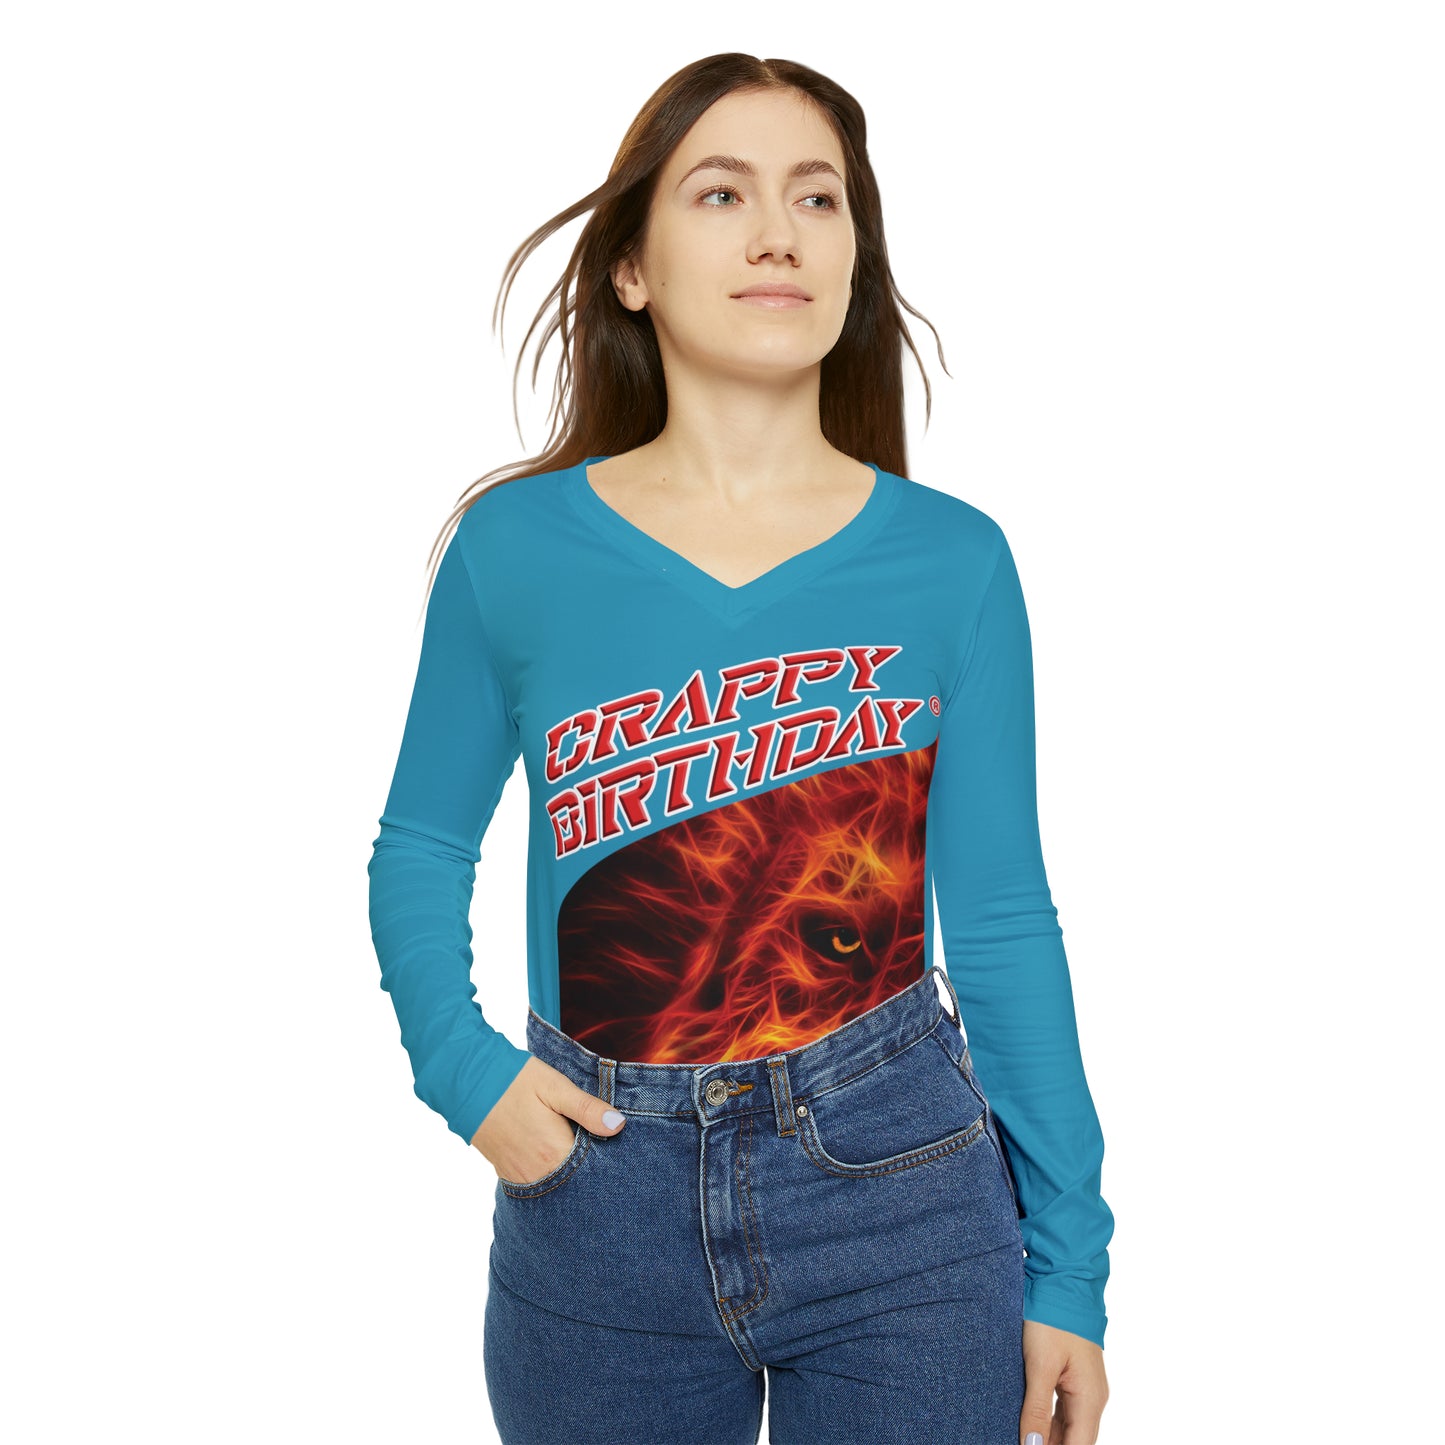 Crappy Birthday Chic Long Sleeve V-Neck Tee - Turquoise